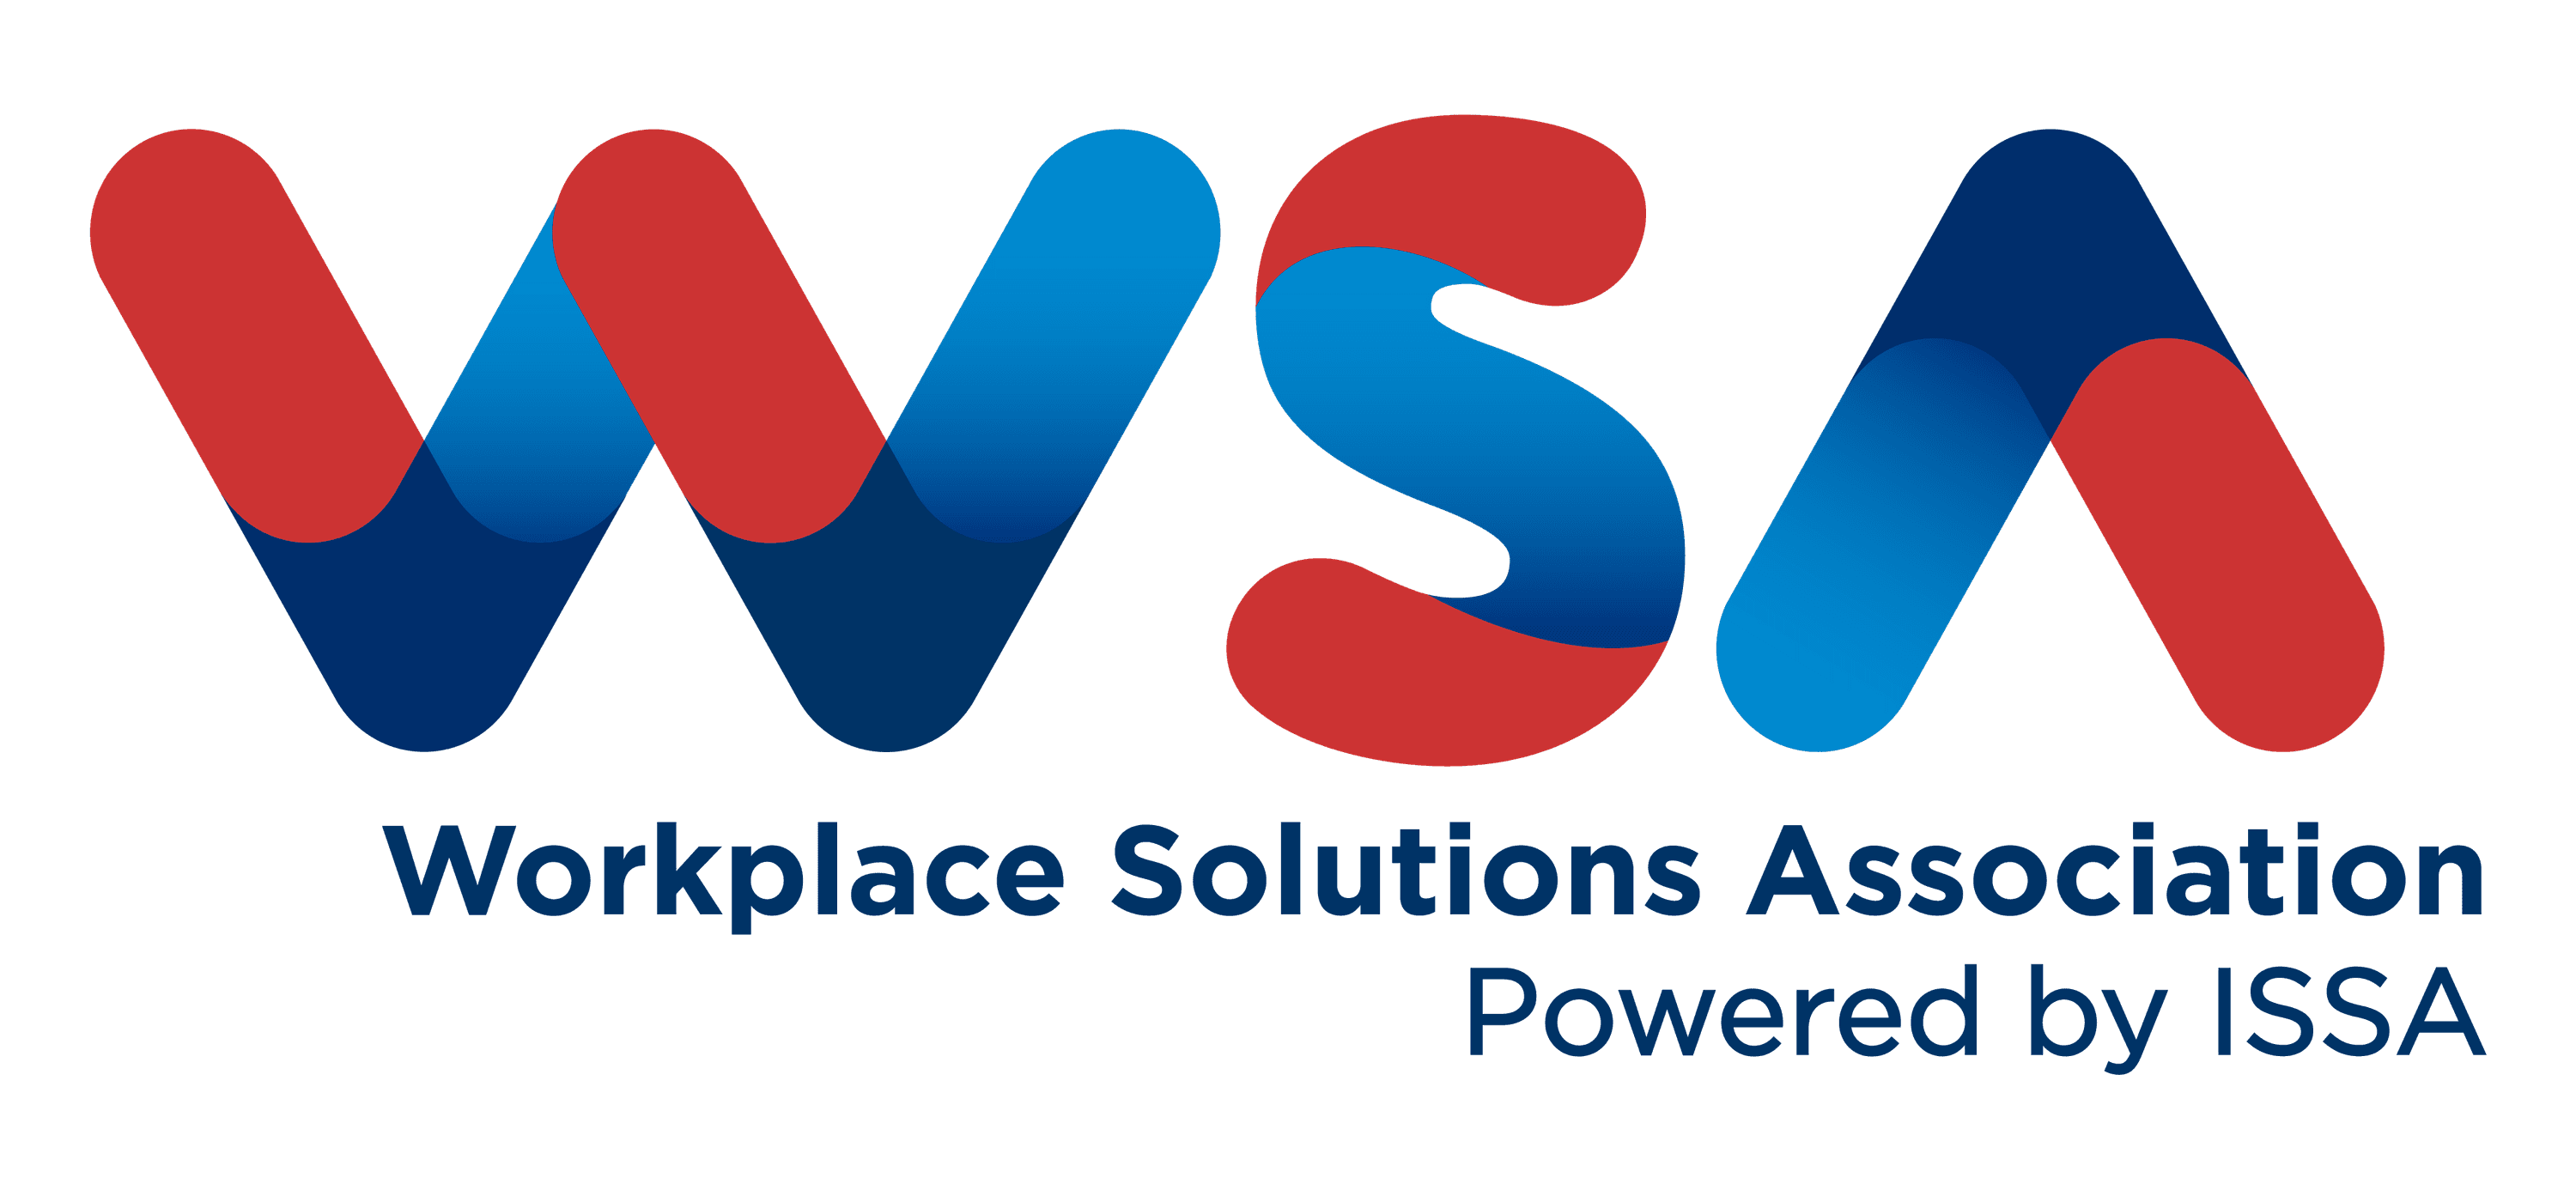 Workplace Solutions Association